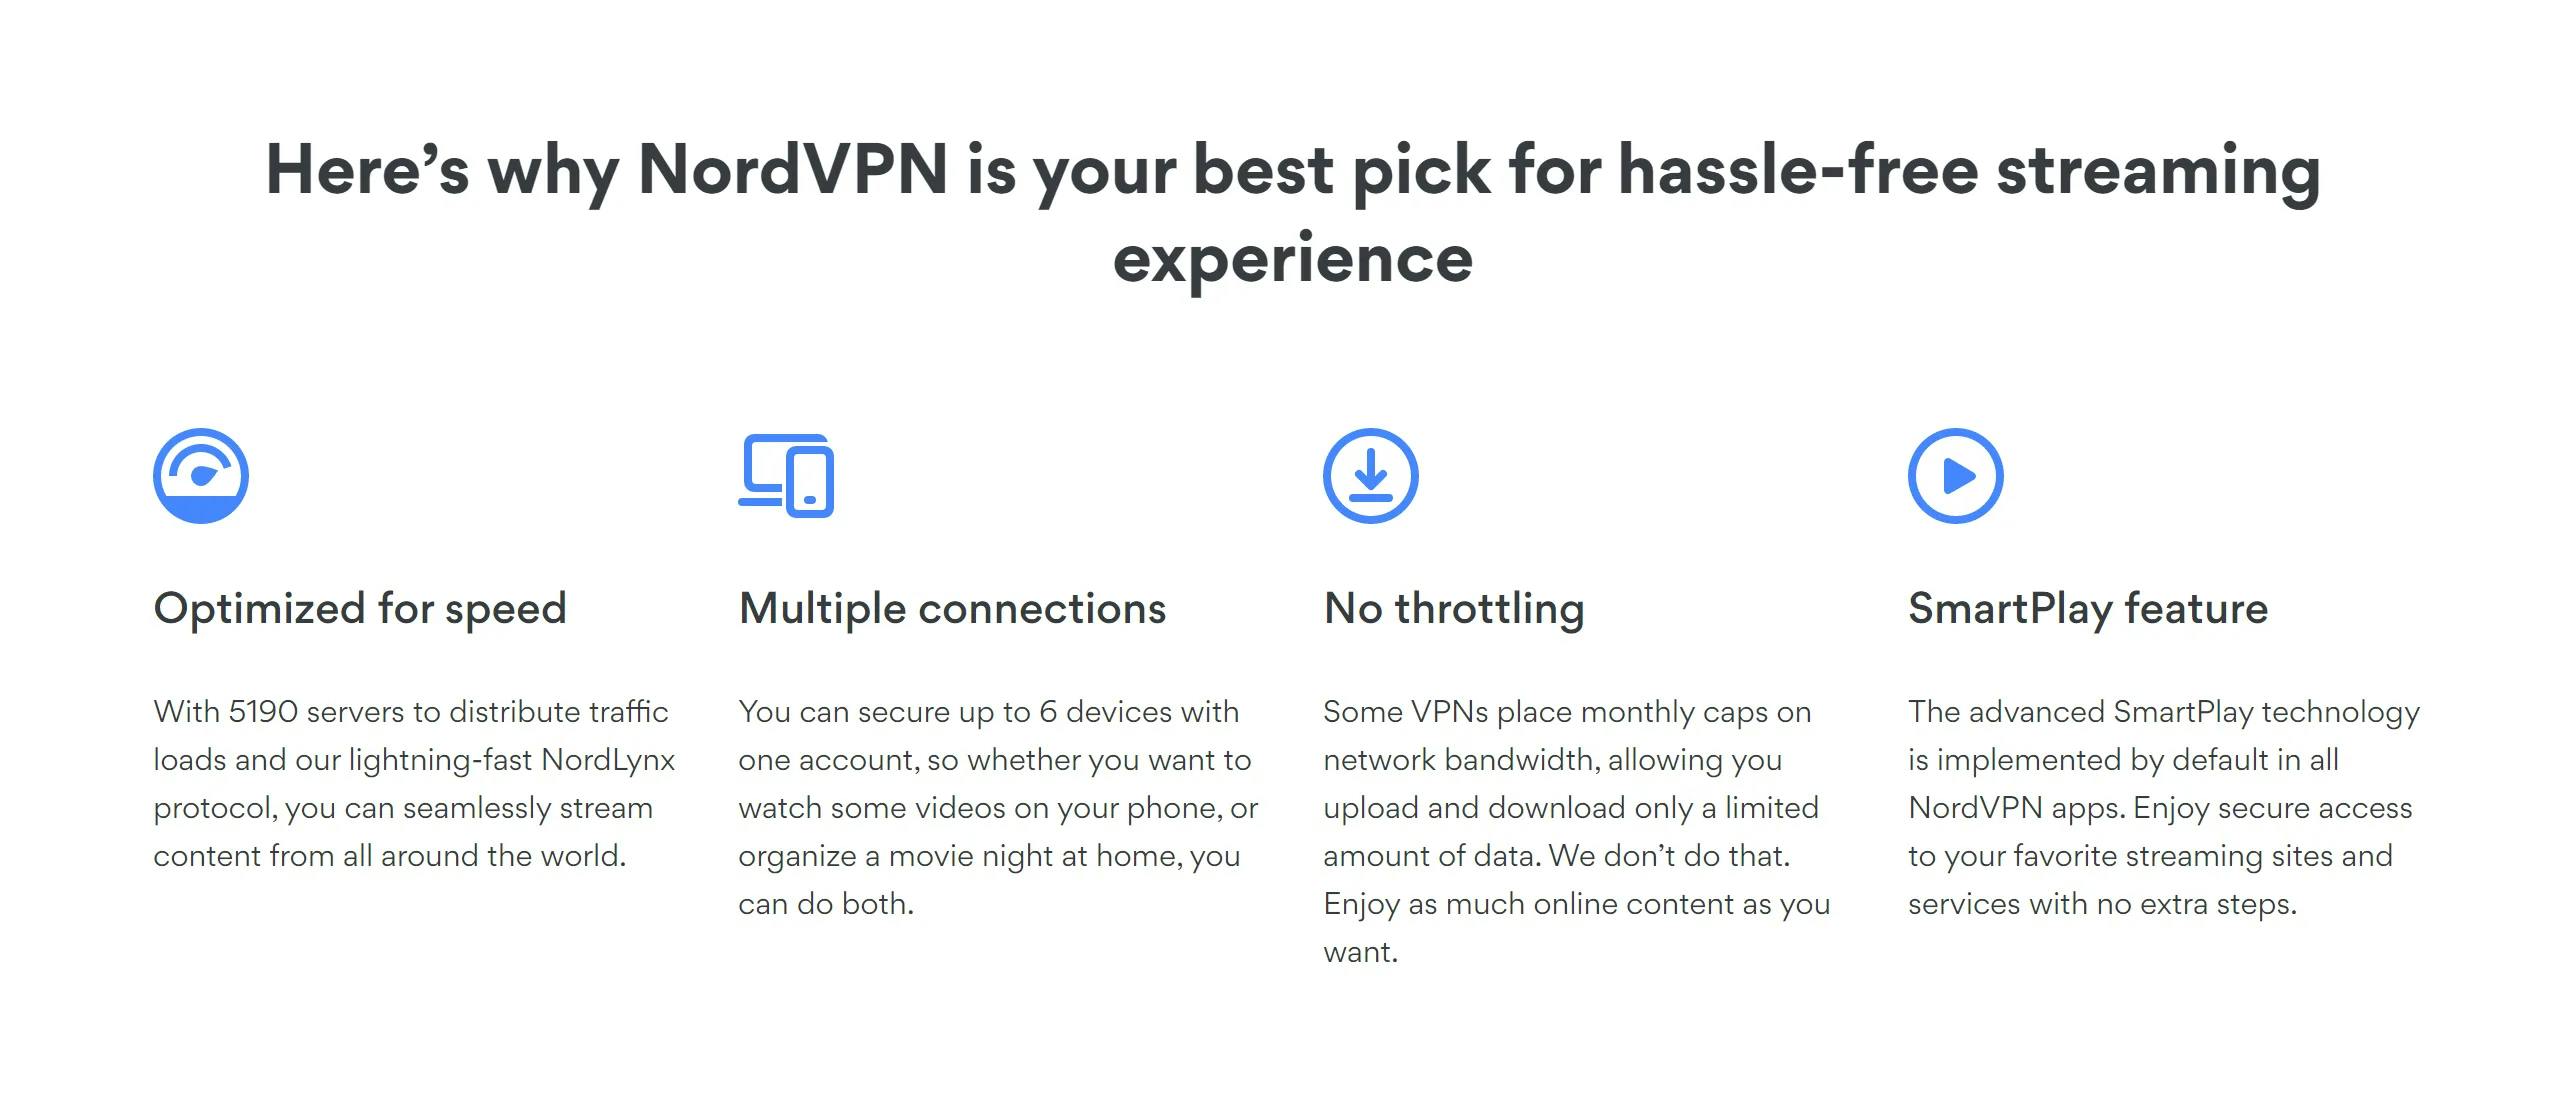 NordVPN features streaming